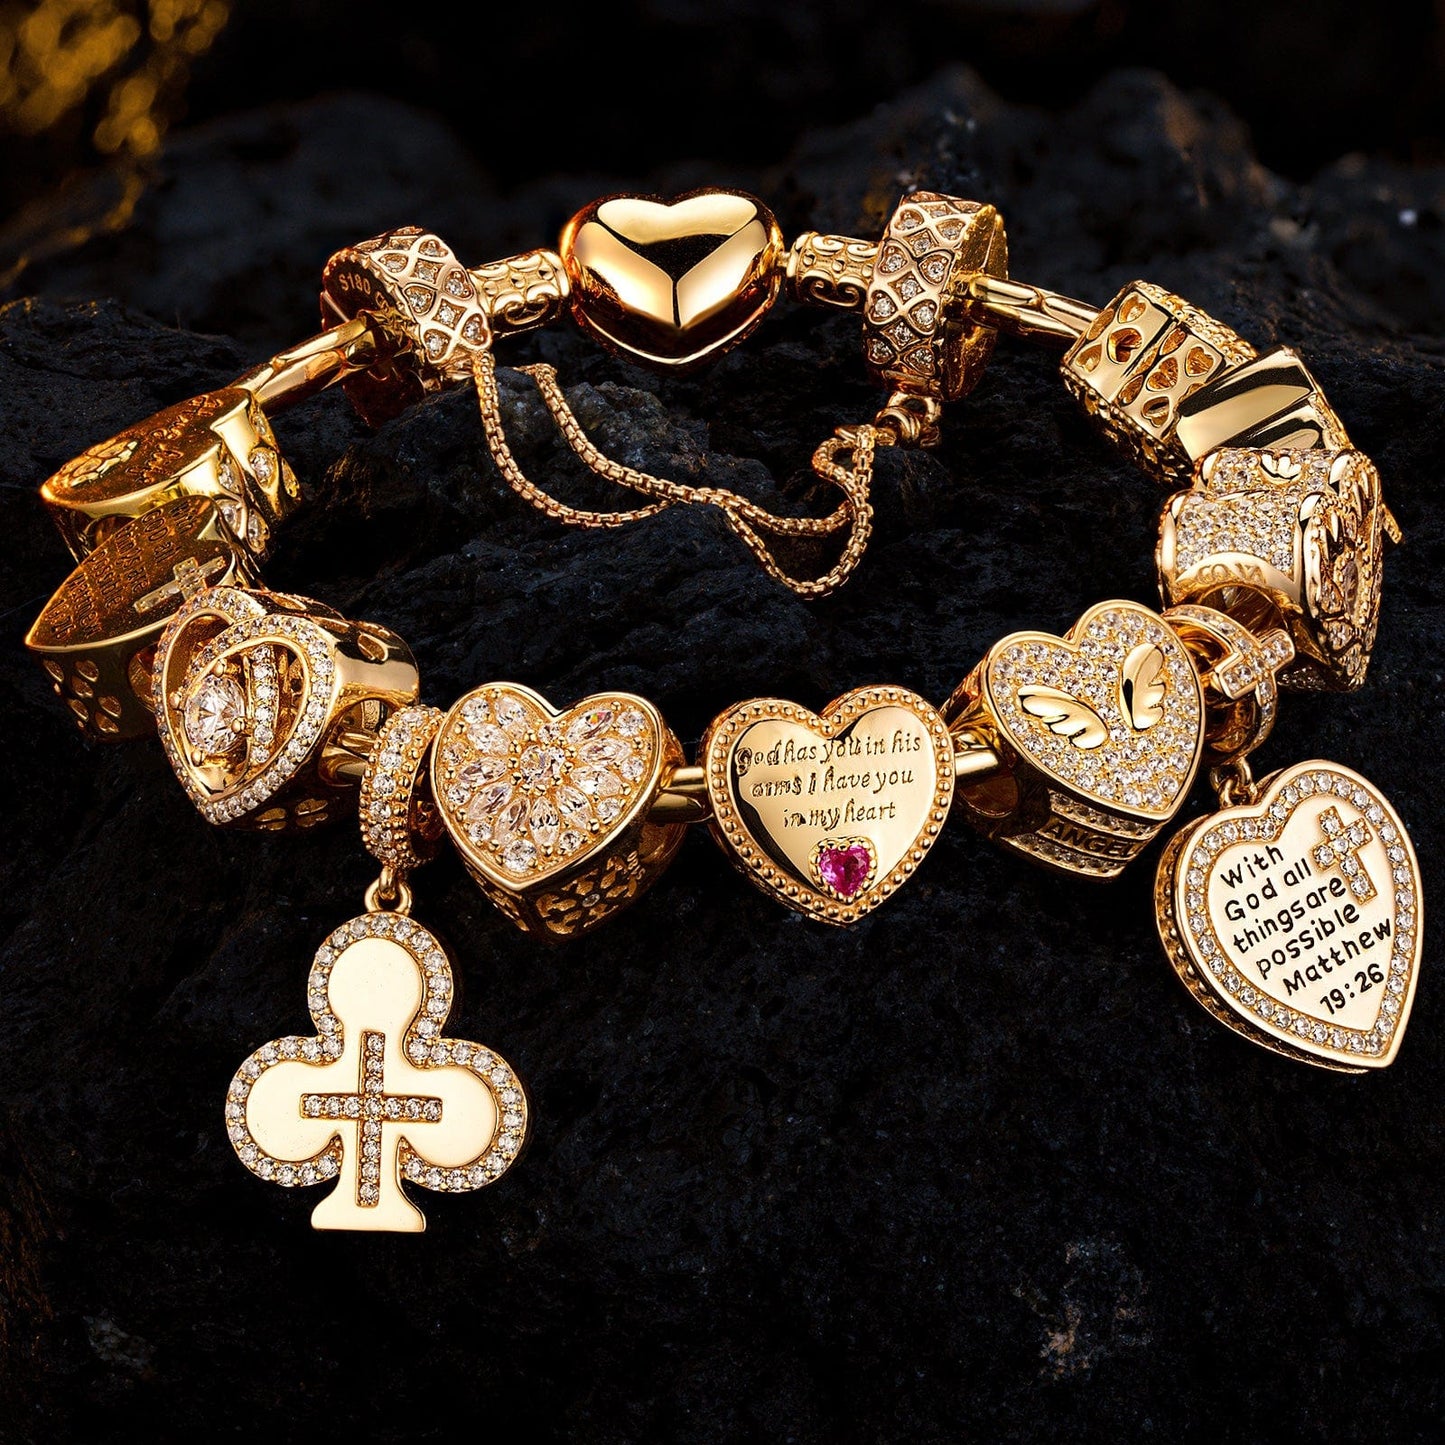 Sterling Silver Eternal Love and Guardian Charms Bracelet Set In 14K Gold Plated